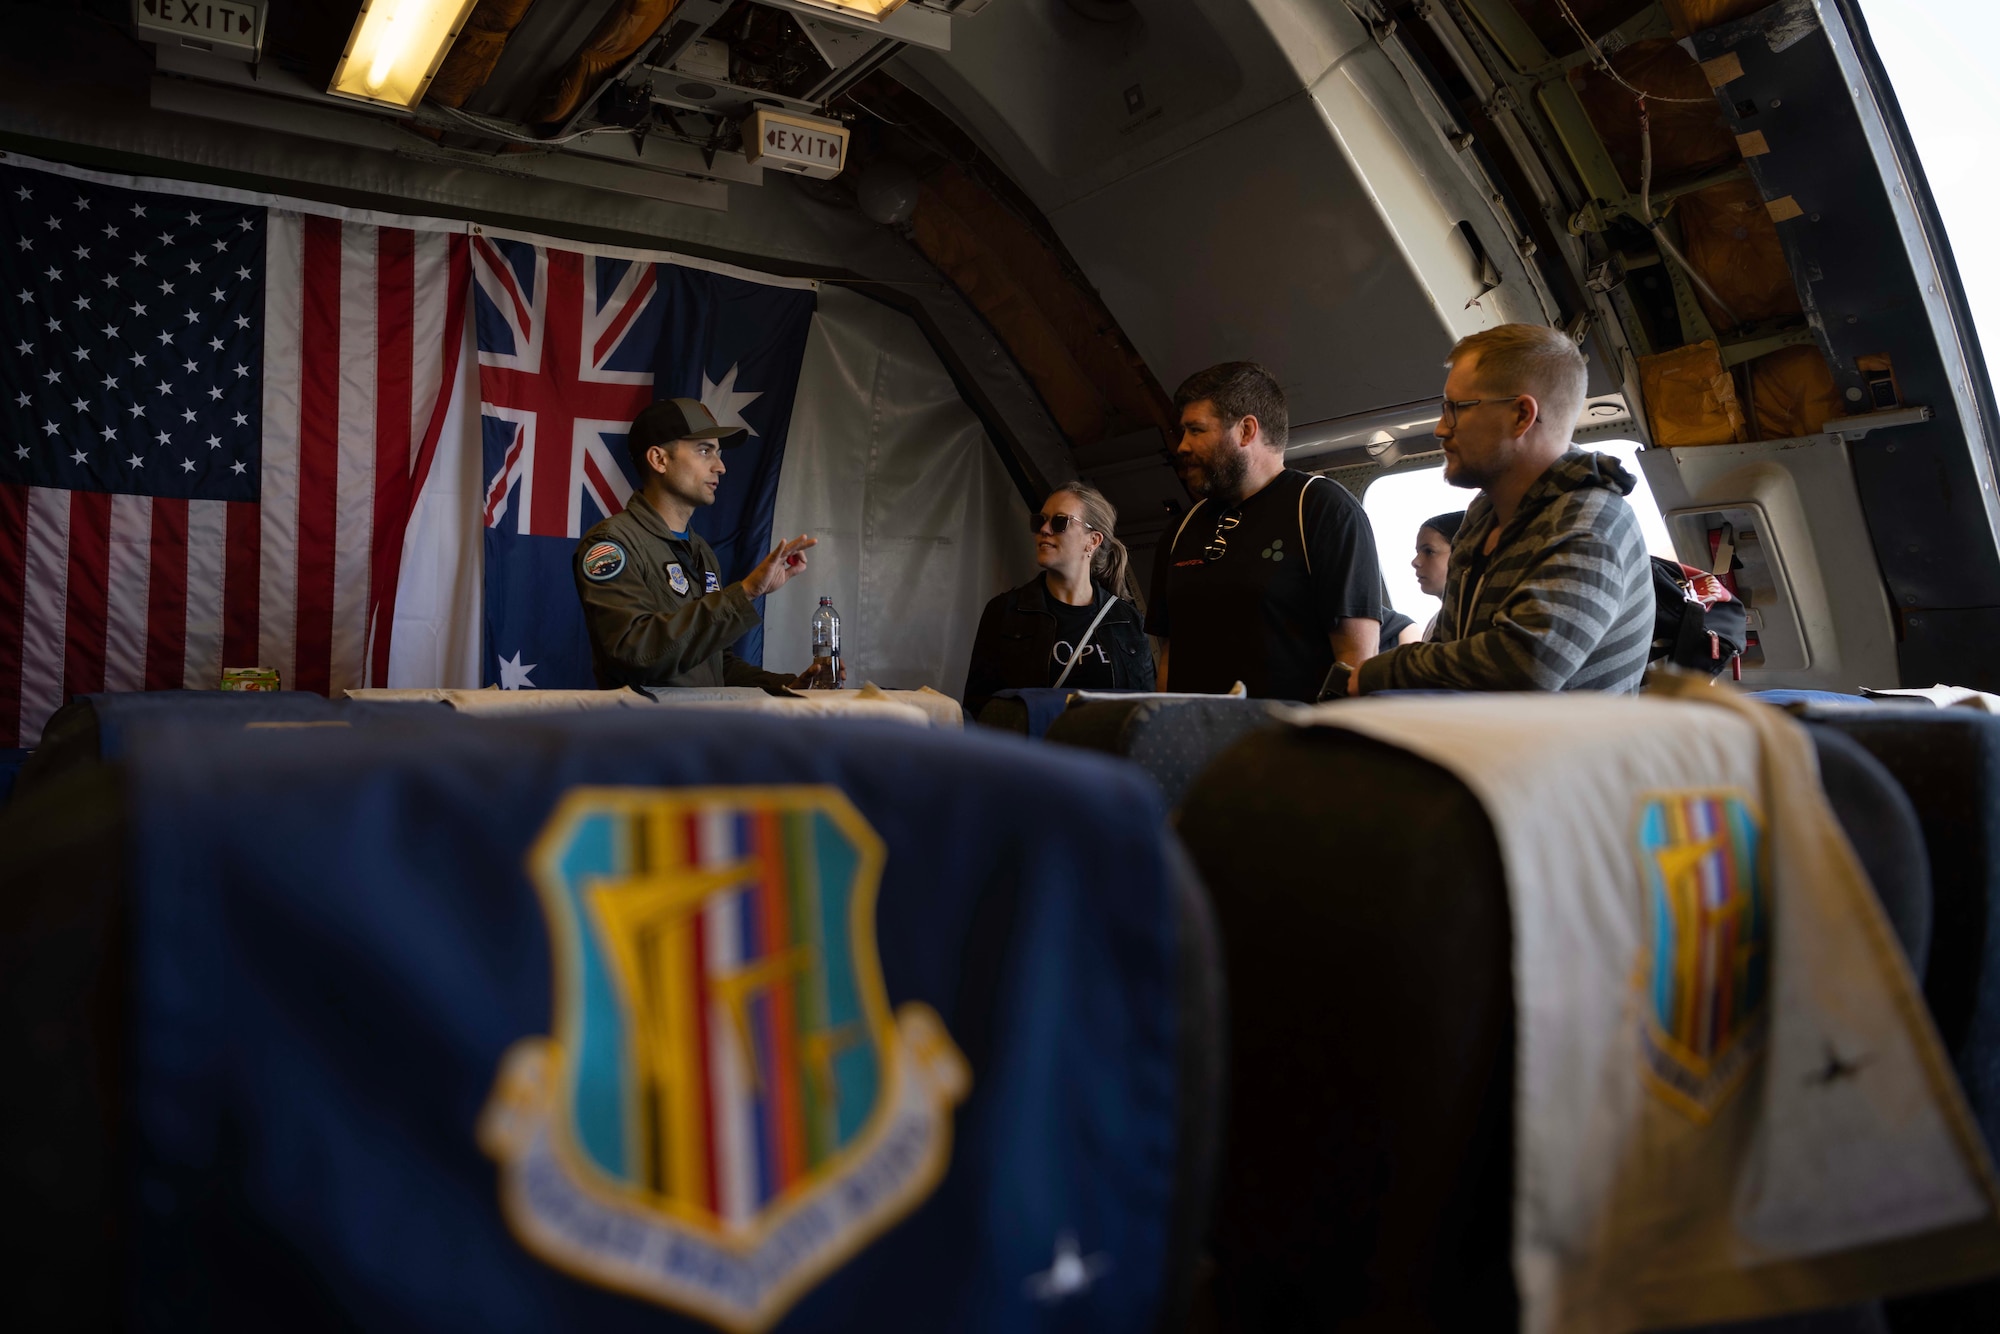 An Airman interacts with visitors inside an aircraft.